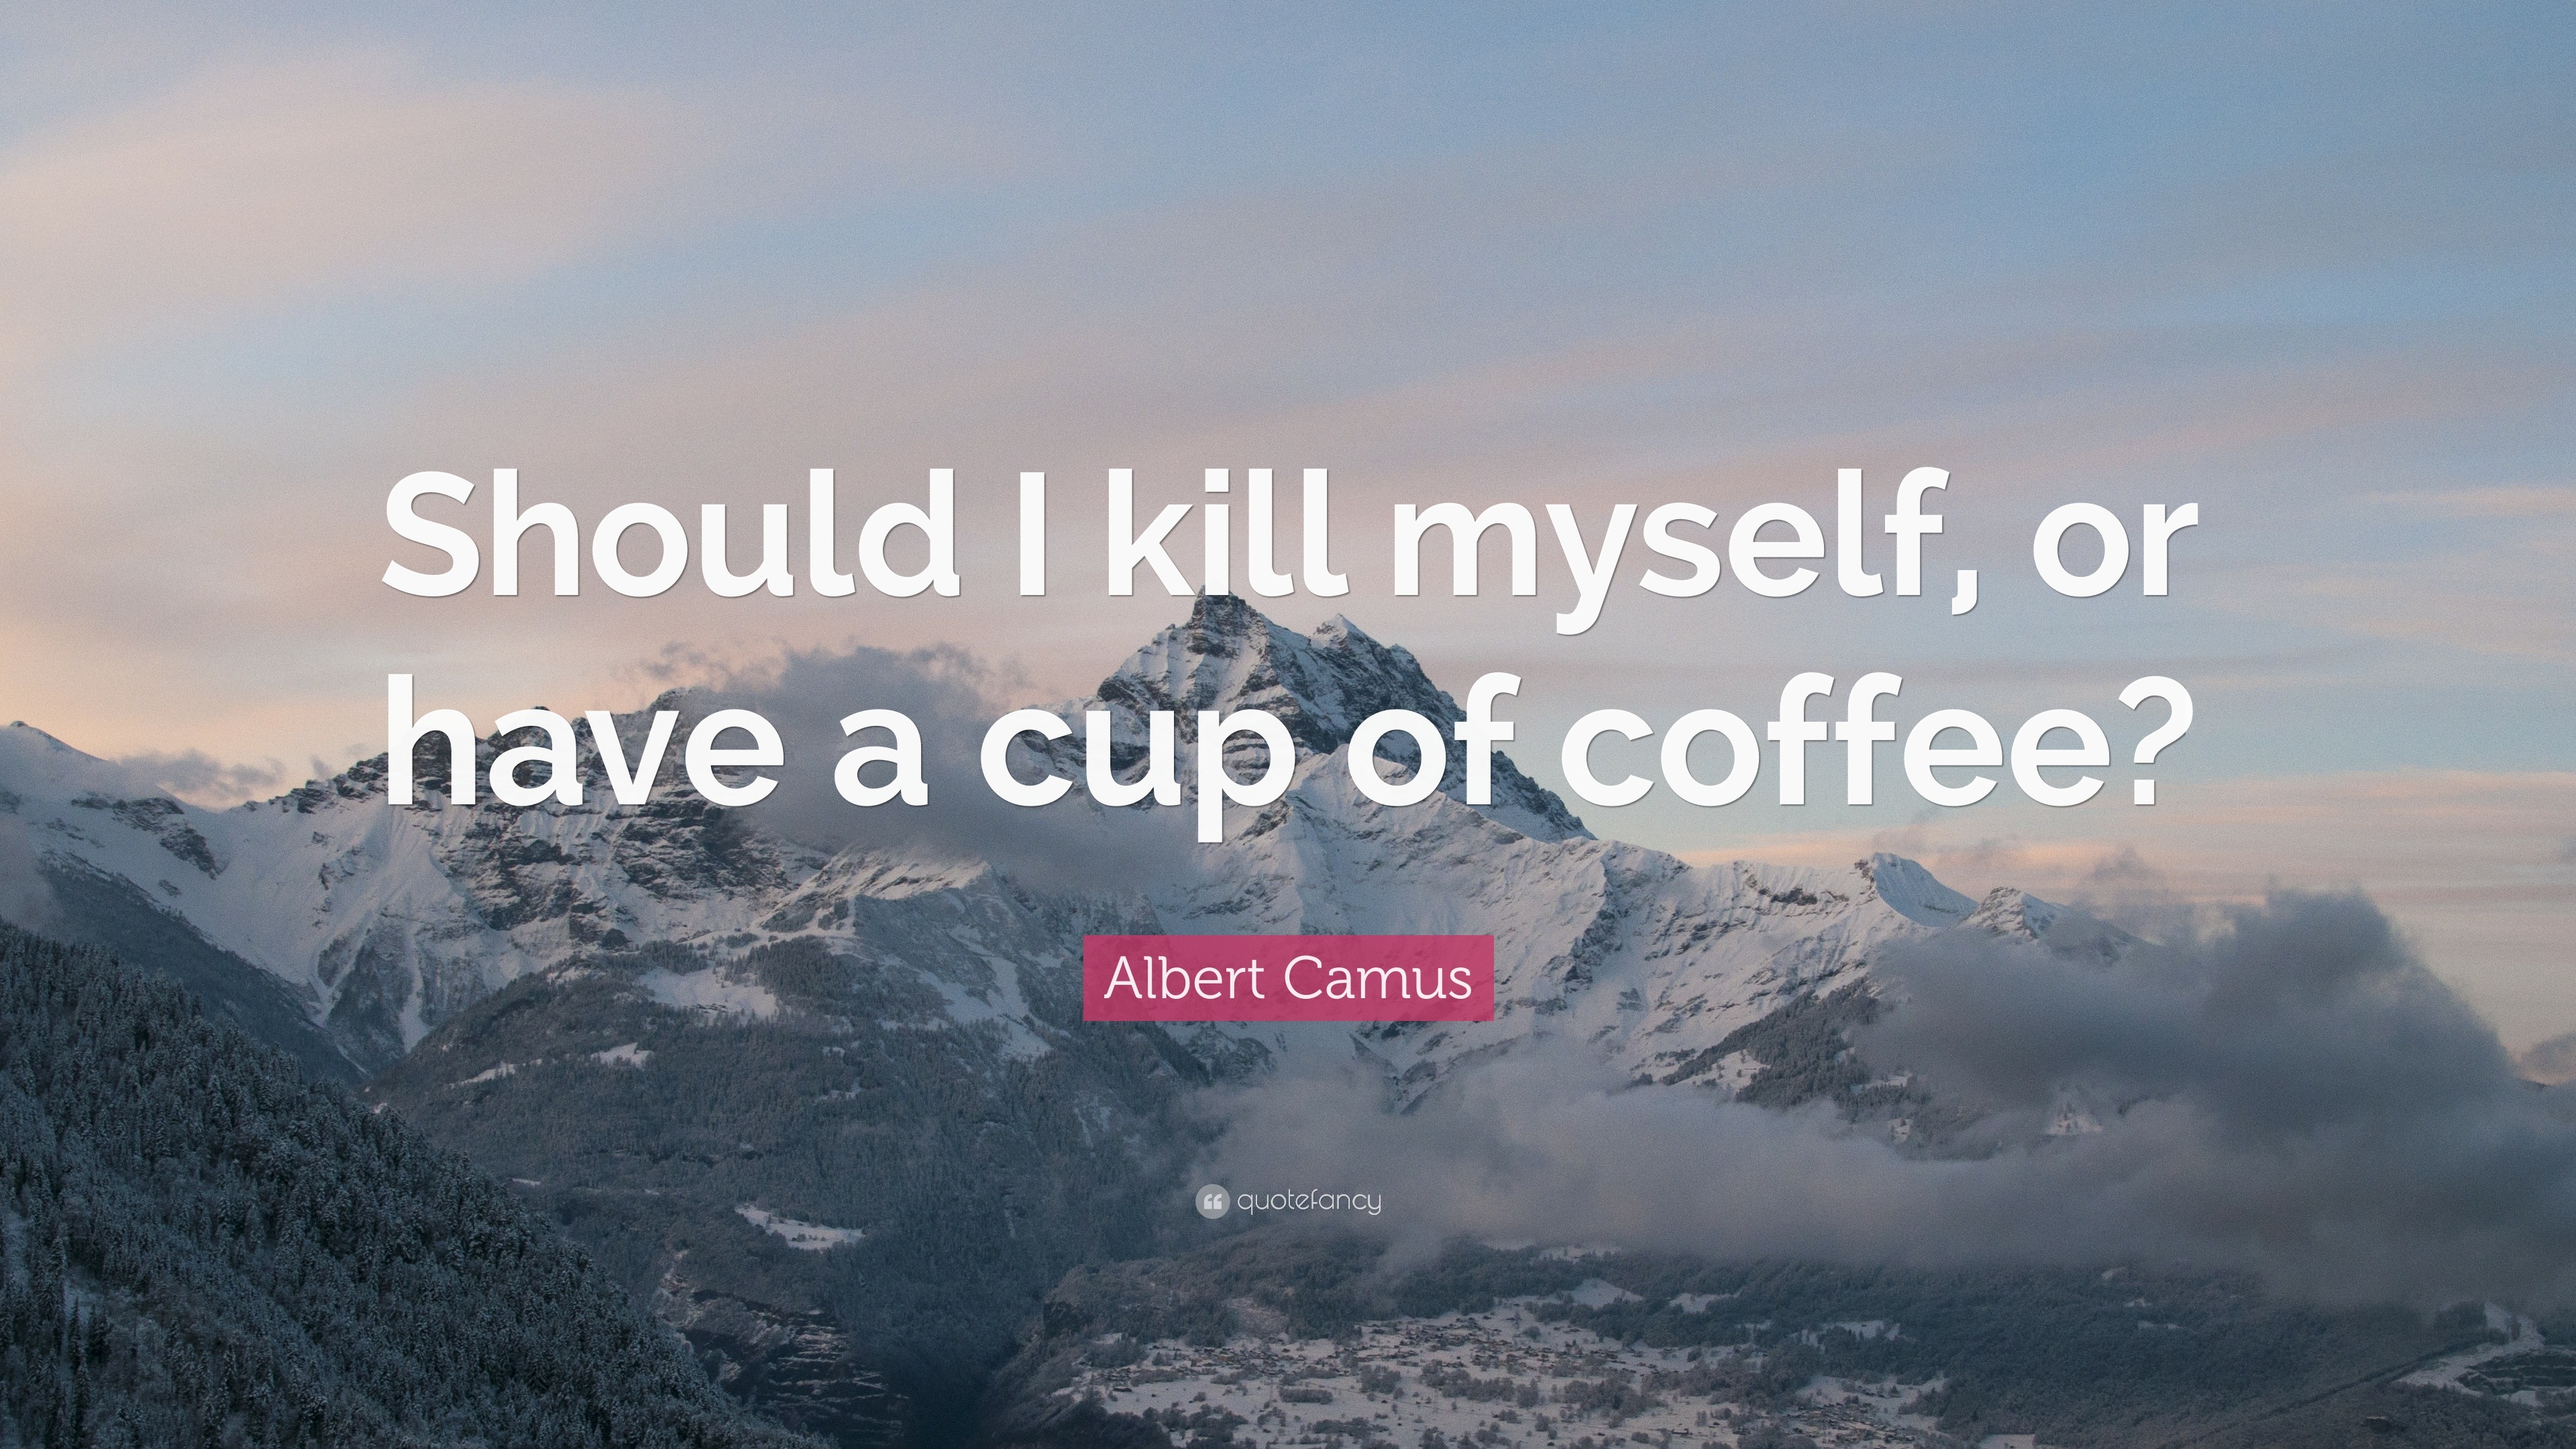 Albert Camus Quote: “Should I kill myself, or have a cup of coffee?”